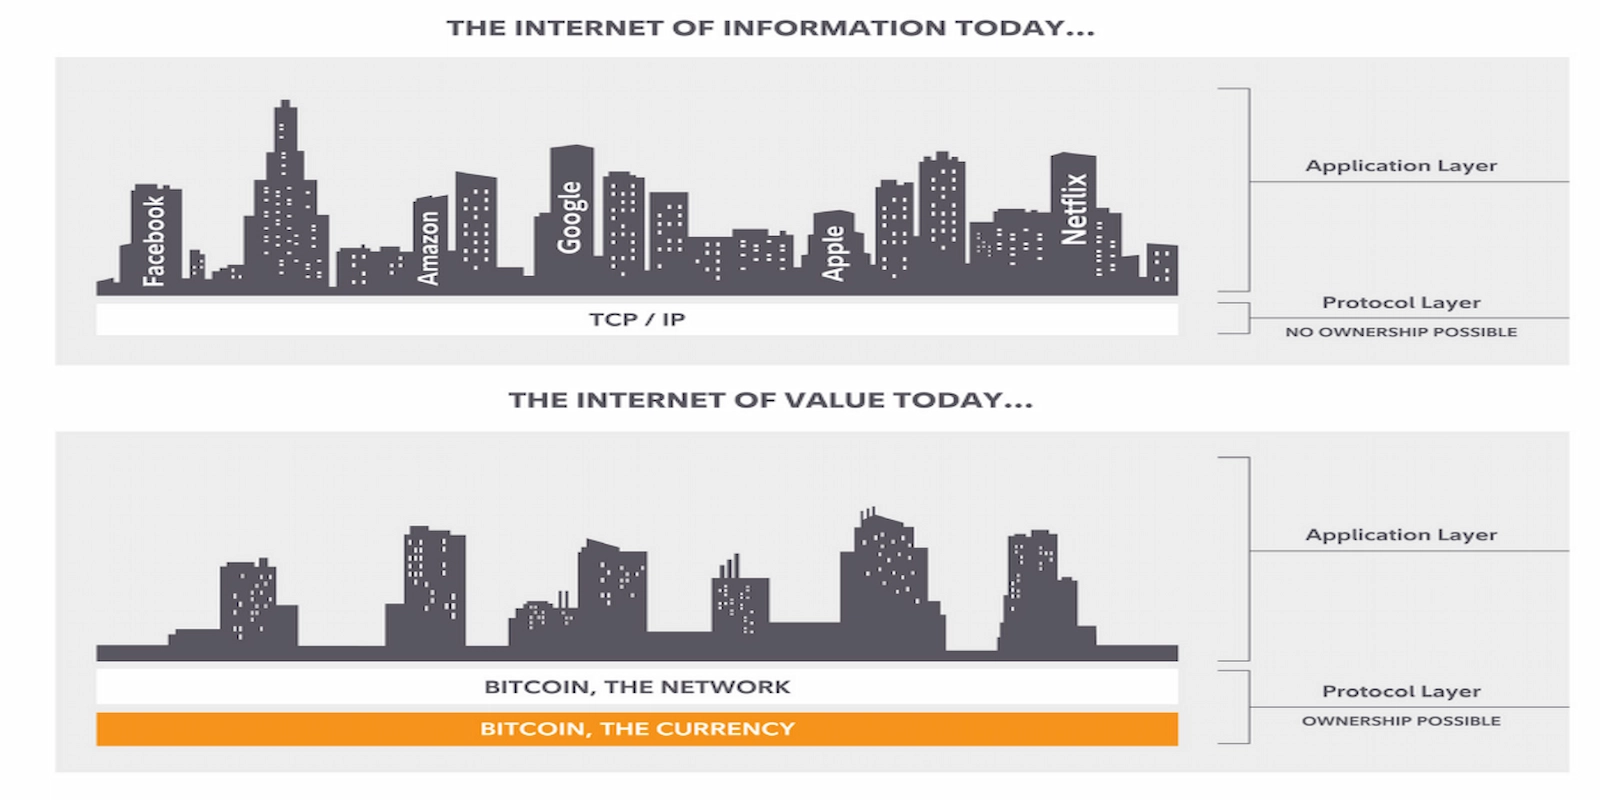 Bitcoin is similar to the TCP/IP layer of the internet.